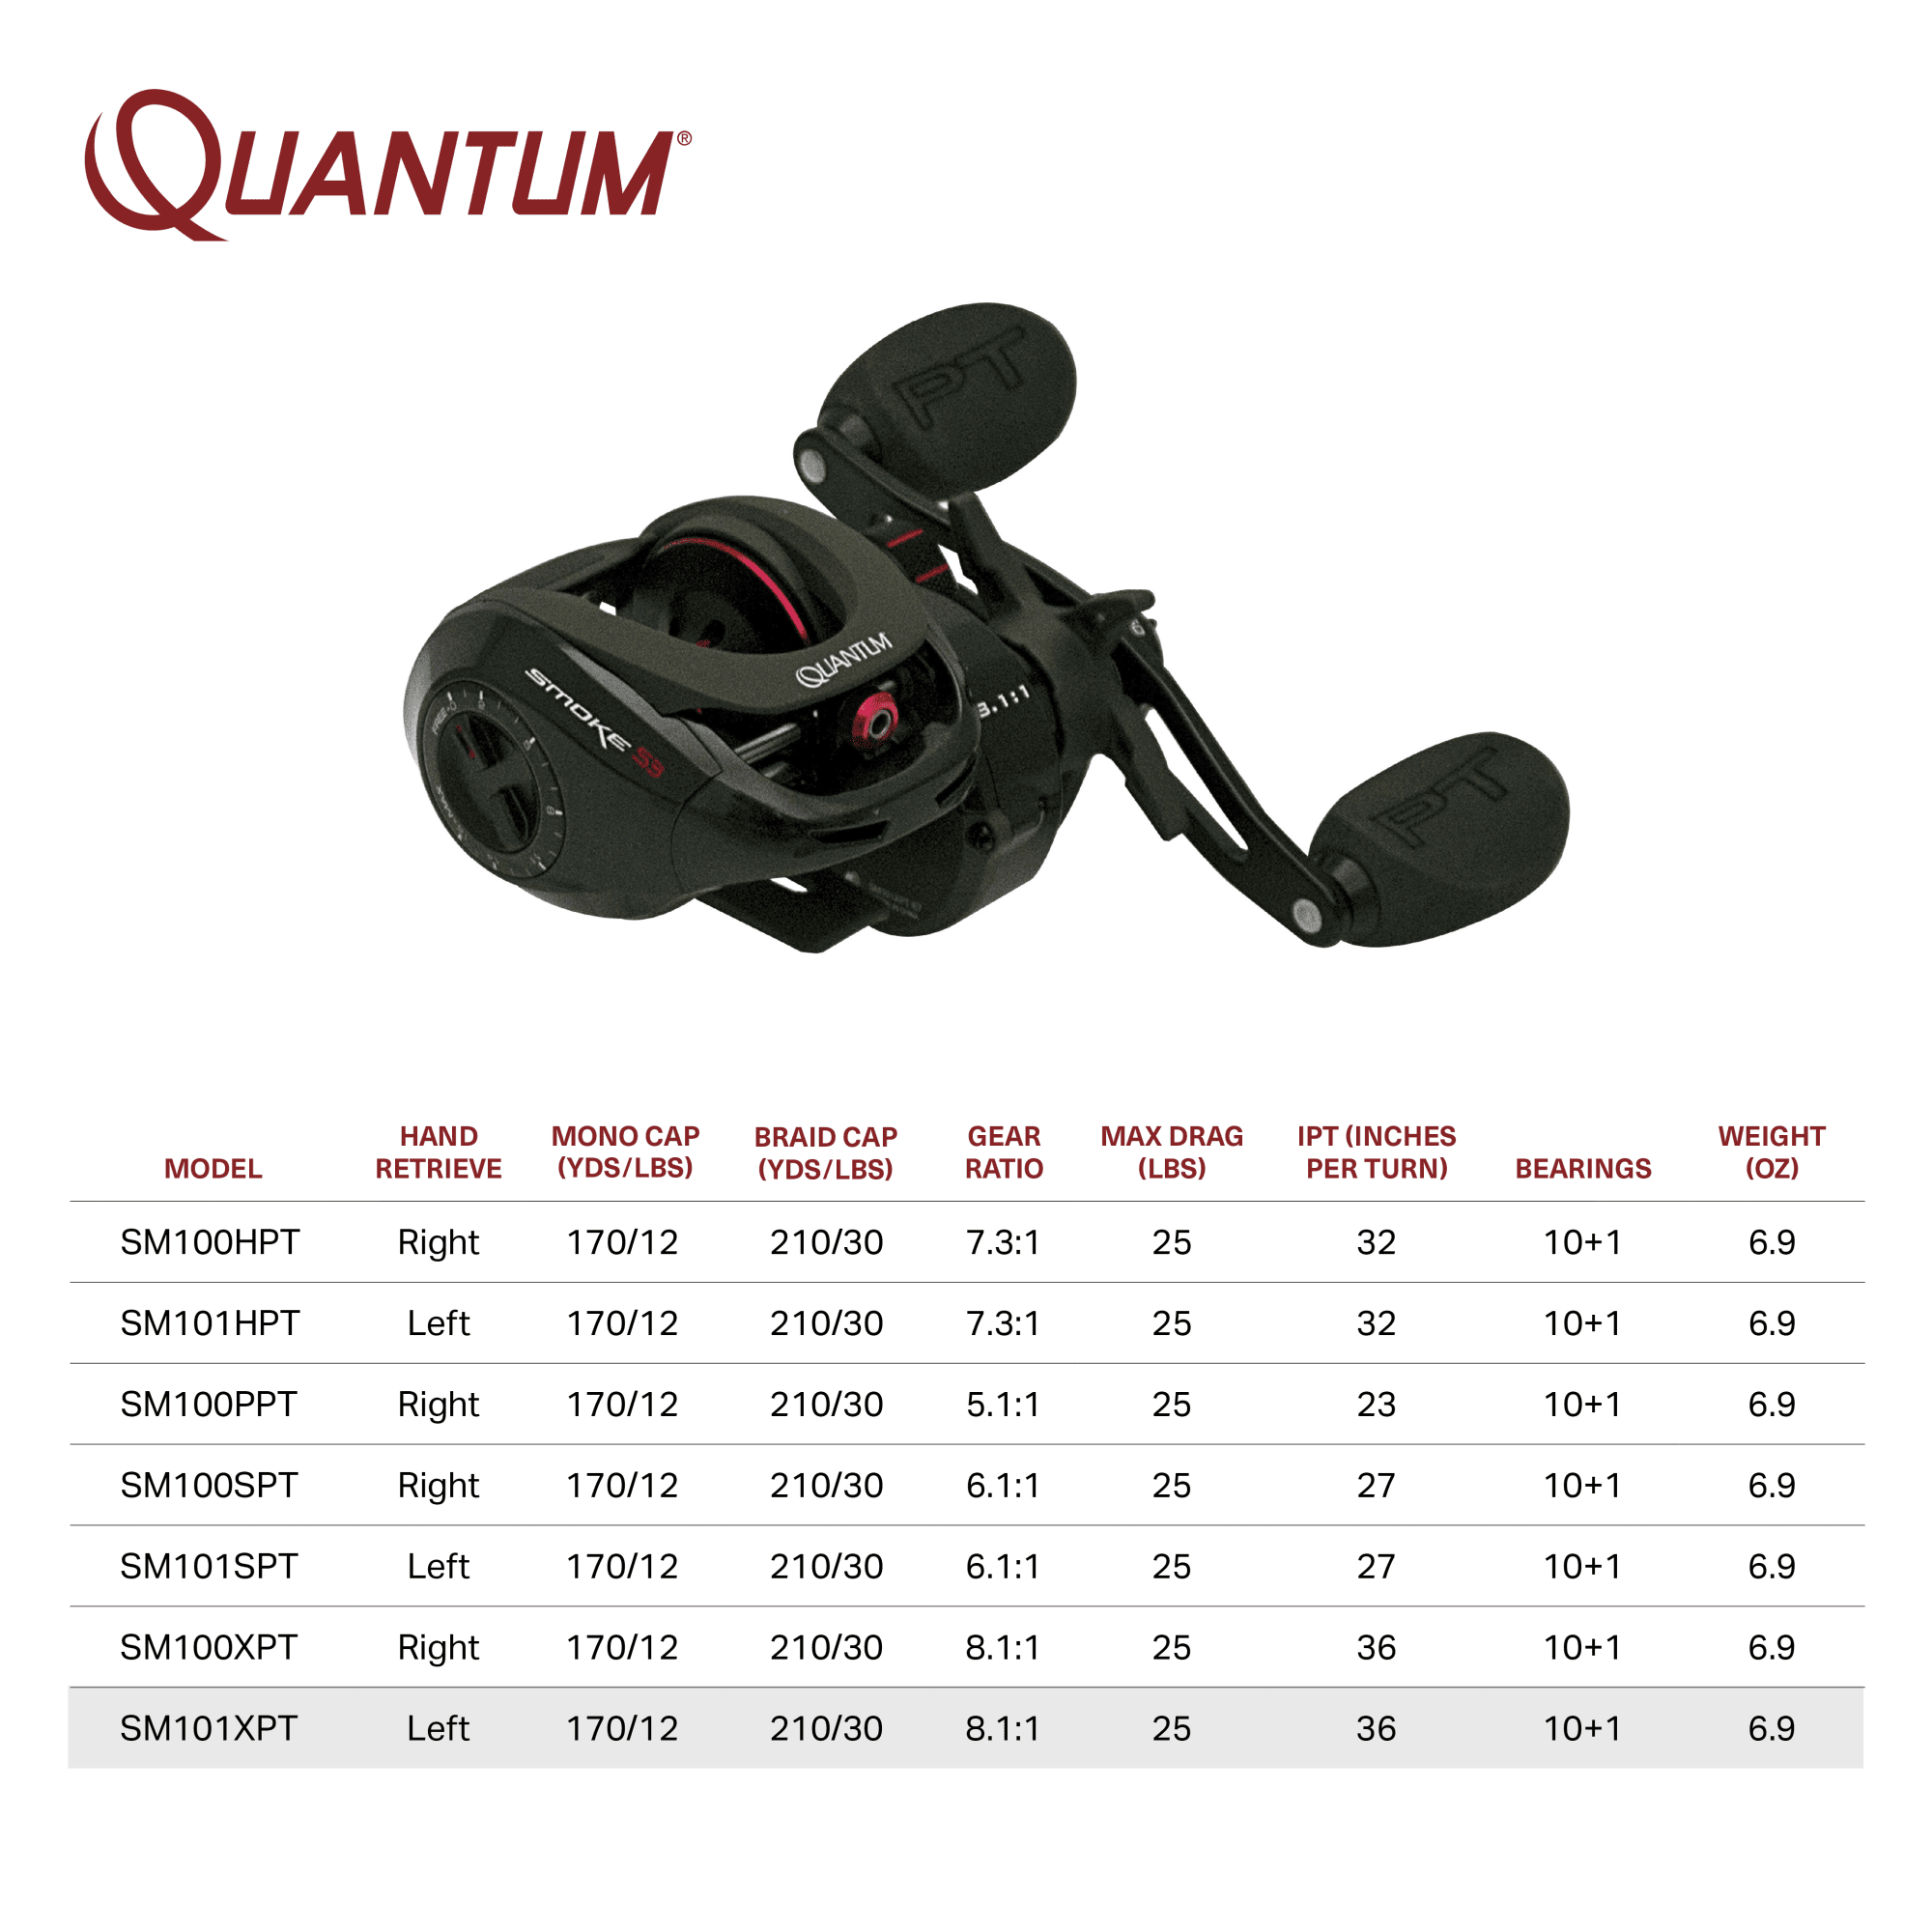 Quantum Smoke Baitcast Fishing Reel, Size 100 Reel, Right-Hand Retrieve,  Large EVA Handle Knobs and Continuous Anti-Reverse Clutch, 10+1 Bearings,  5.1:1 Gear Ratio, Black 